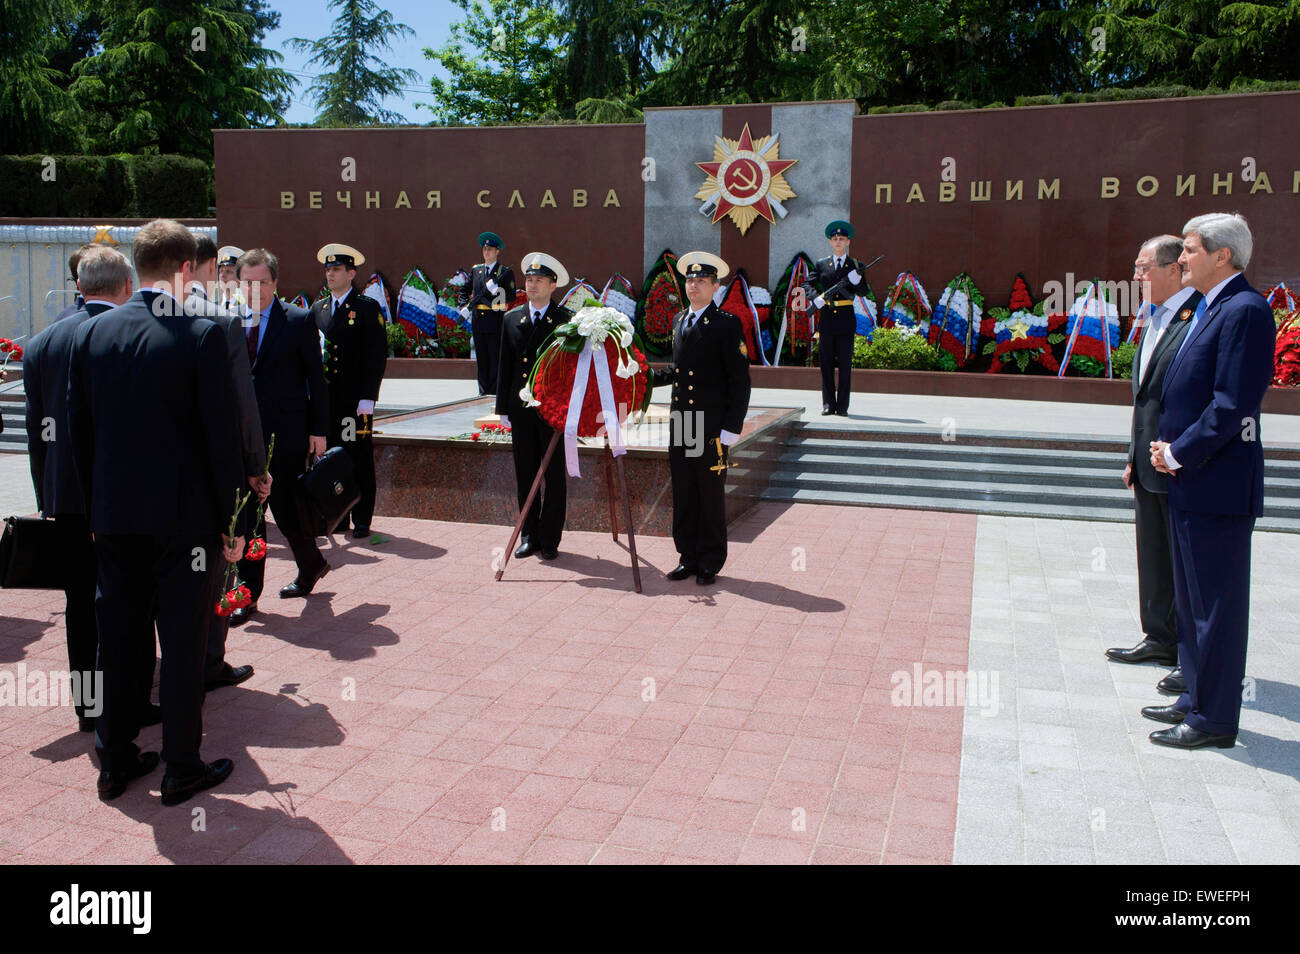 U.S. Secretary of State John Kerry and Russian Foreign Minister Sergey Lavrov watch as members of their respective staffs each place a pair of roses on May 12, 2015, at the Zavokzalny War Memorial in Sochi, Russia, built in 1985 to commemorate the 40th anniversary of the end of World War II, and where about 4,000 soldiers are buried. Stock Photo